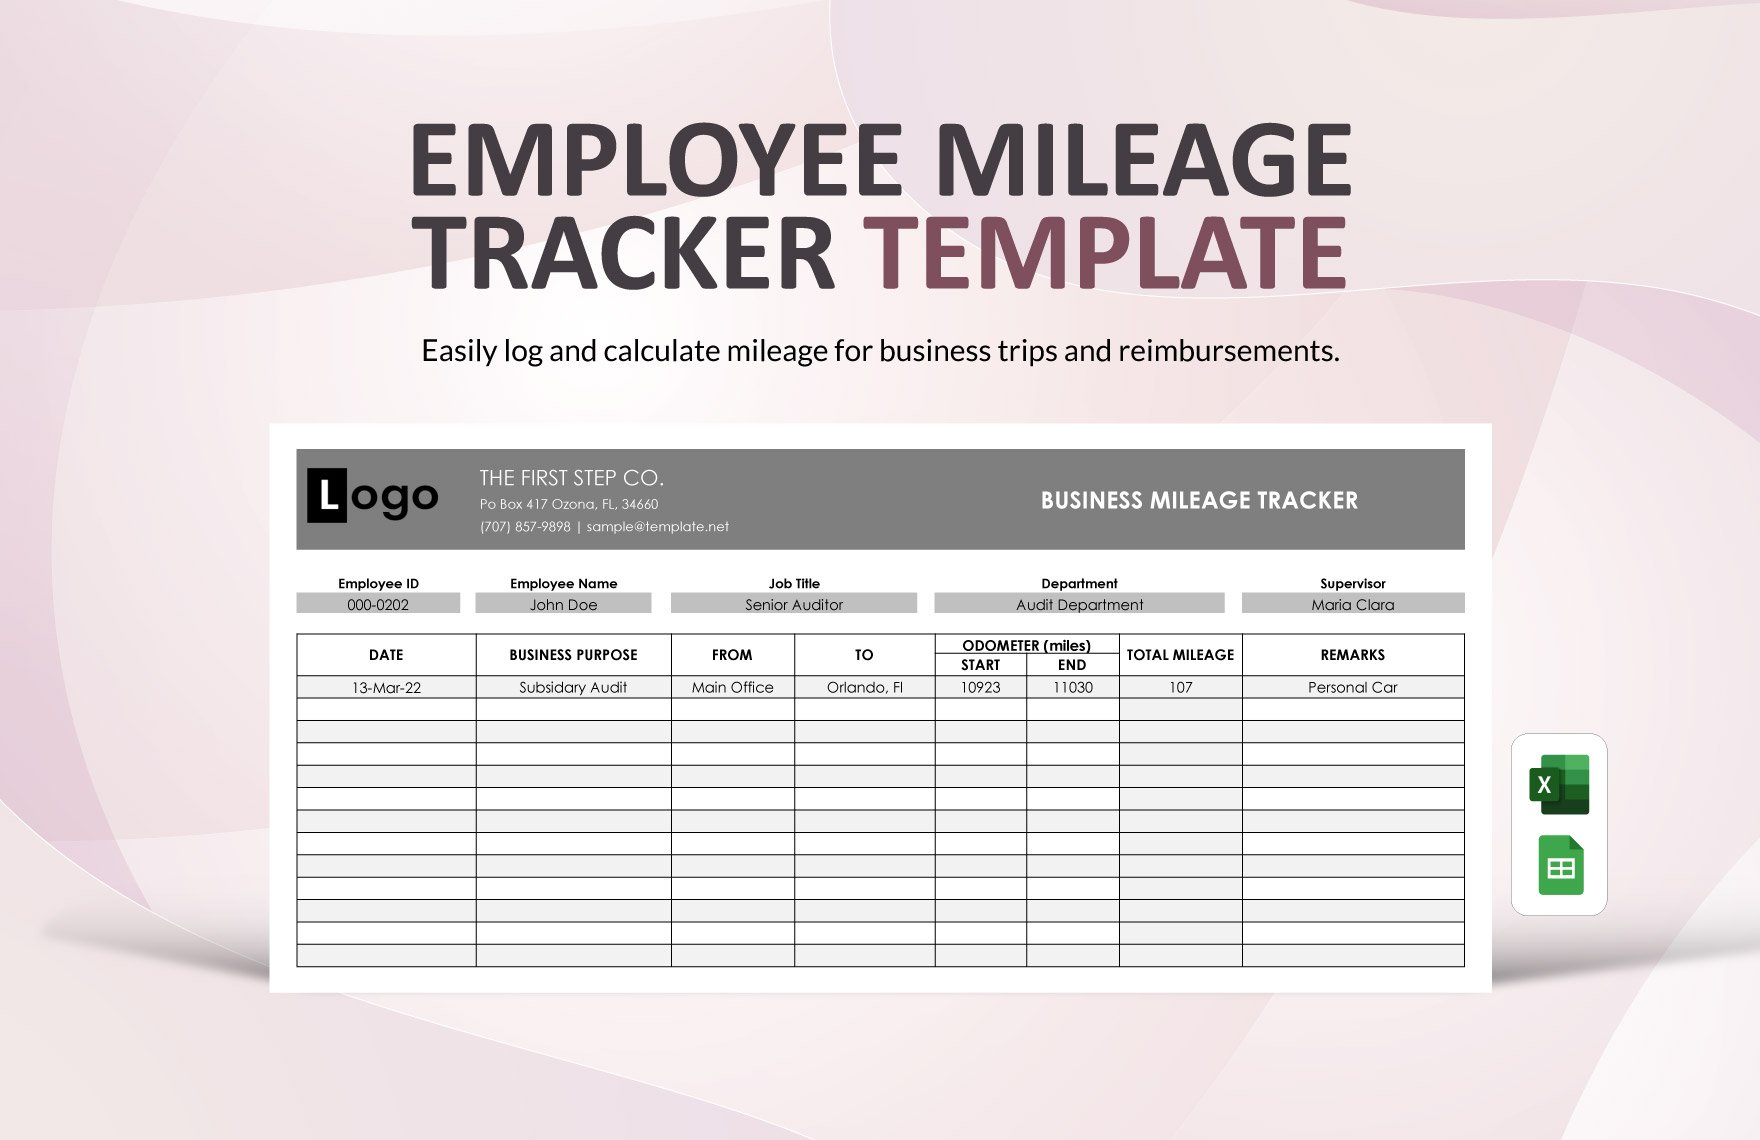 Employee Mileage Tracker Template in Excel, Google Sheets